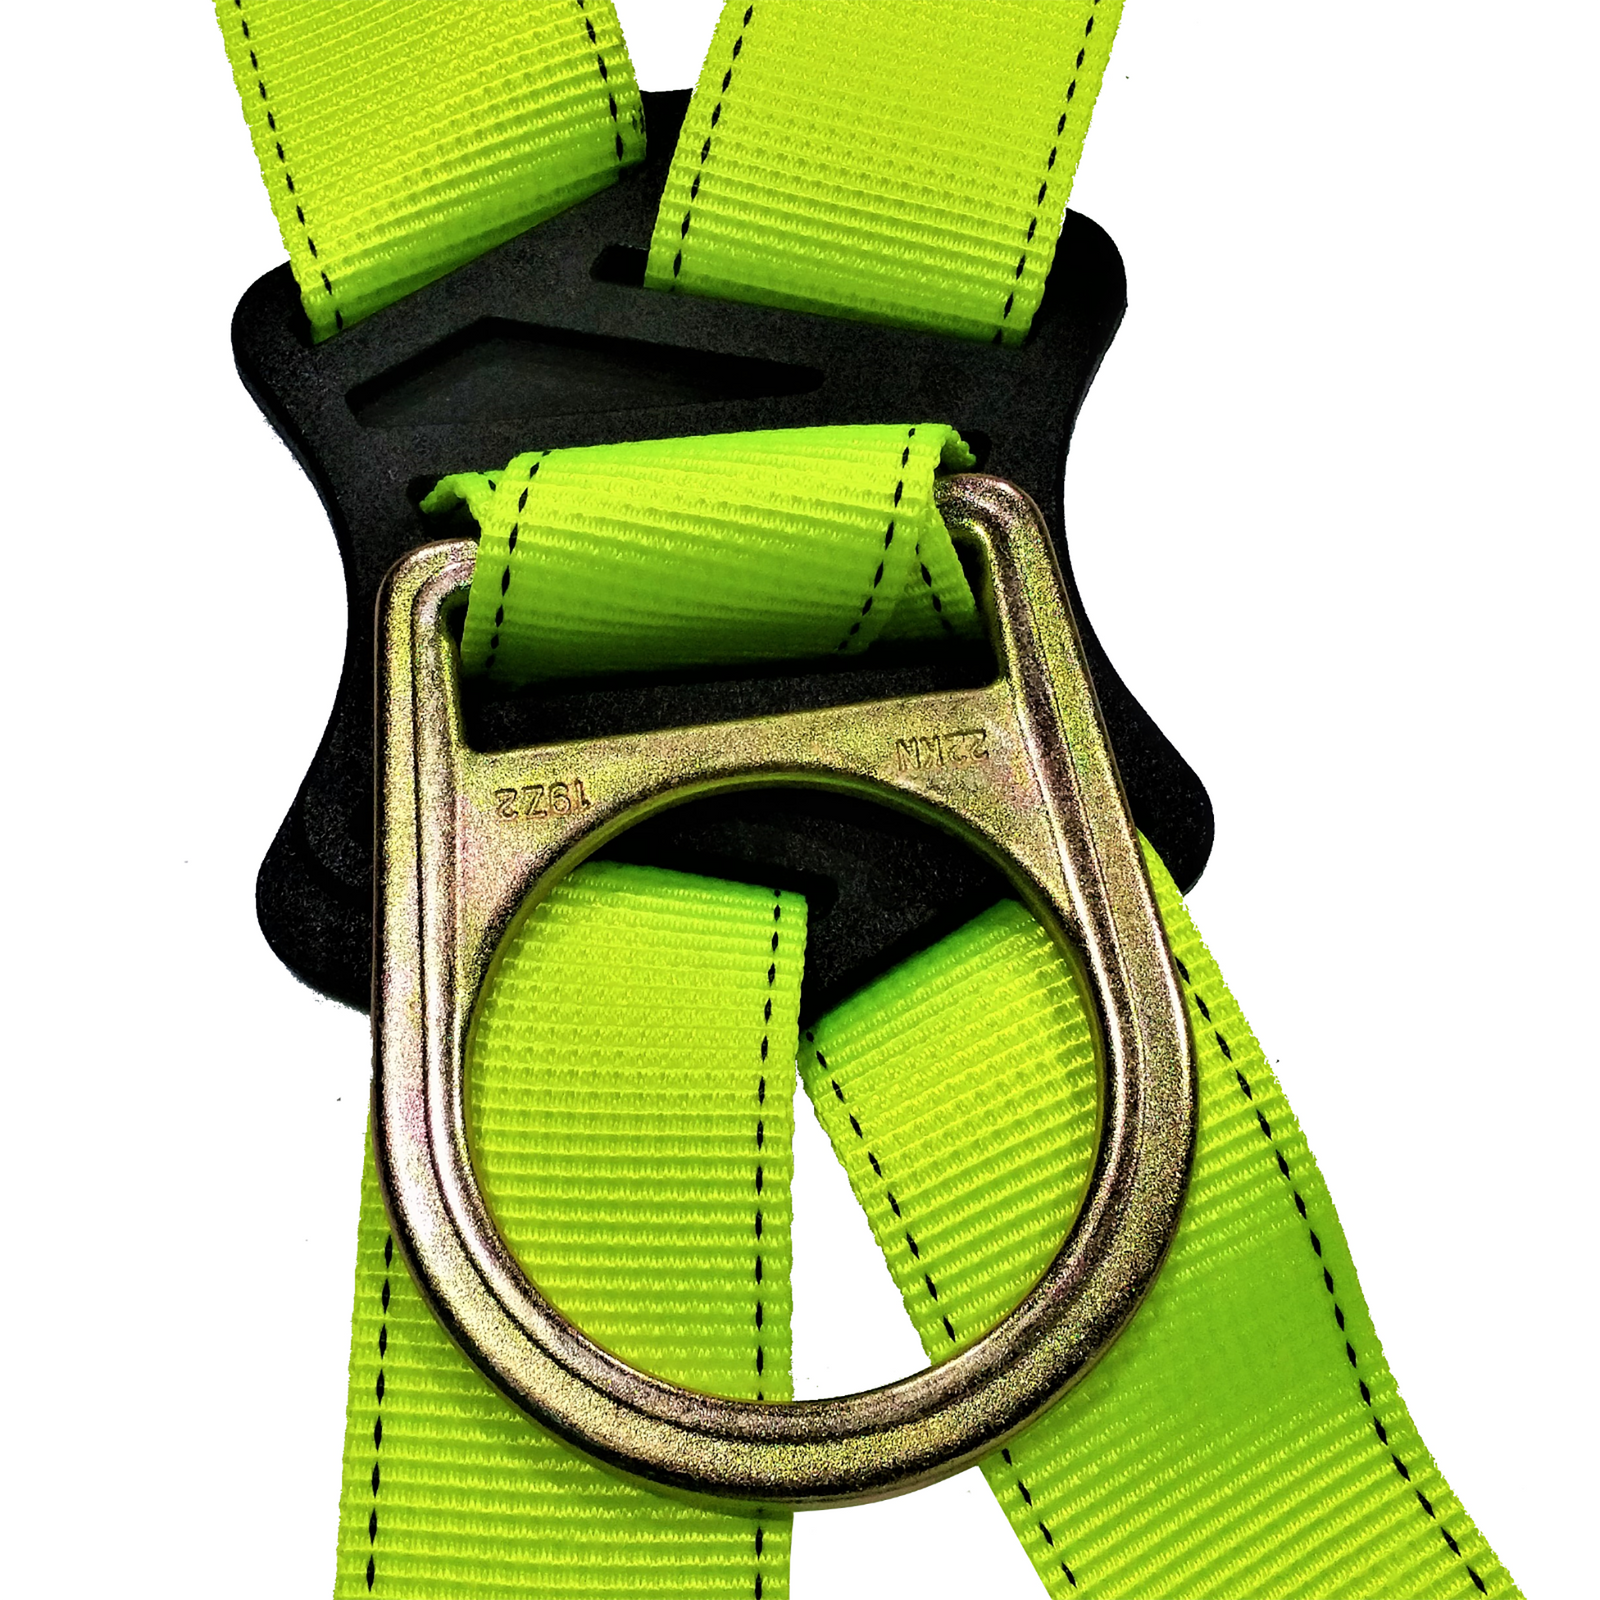 Close up of the heavy duty metal D ring of the fall protection harness located in the middle of the persons back when wearing the fall protection safety tower body harness with grommets